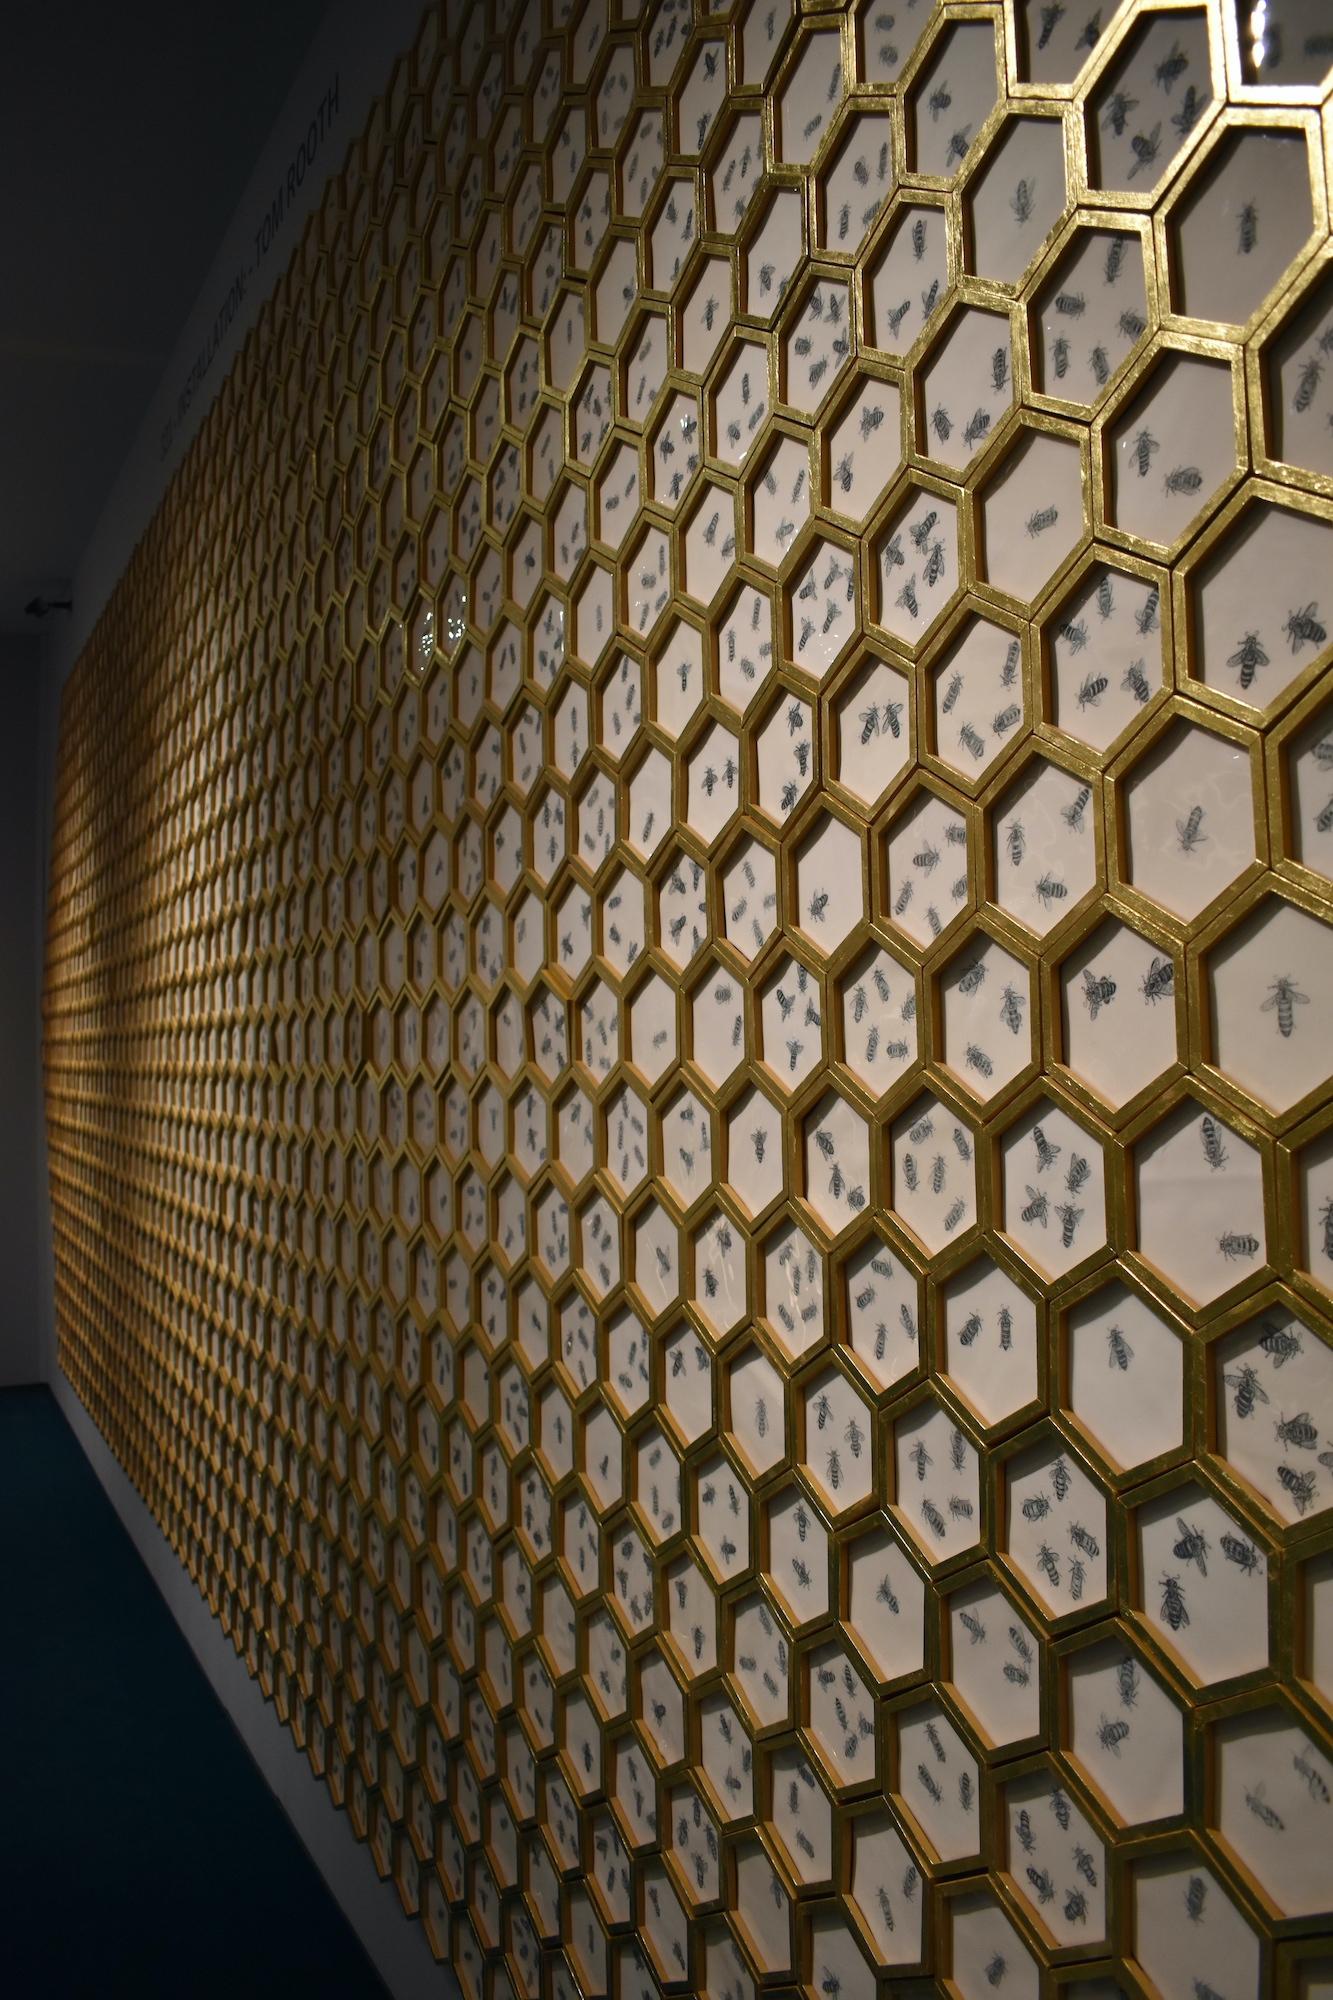 'Honeycomb' was created  by Tom Rooth in the Cambrian Mountains of Wales, where Tom lives off-grid.

Each ceramic Honeycomb panel has been handmade, drawn, glazed and fired in the Cambrian Mountains of Wales. The frames are also handmade, and have